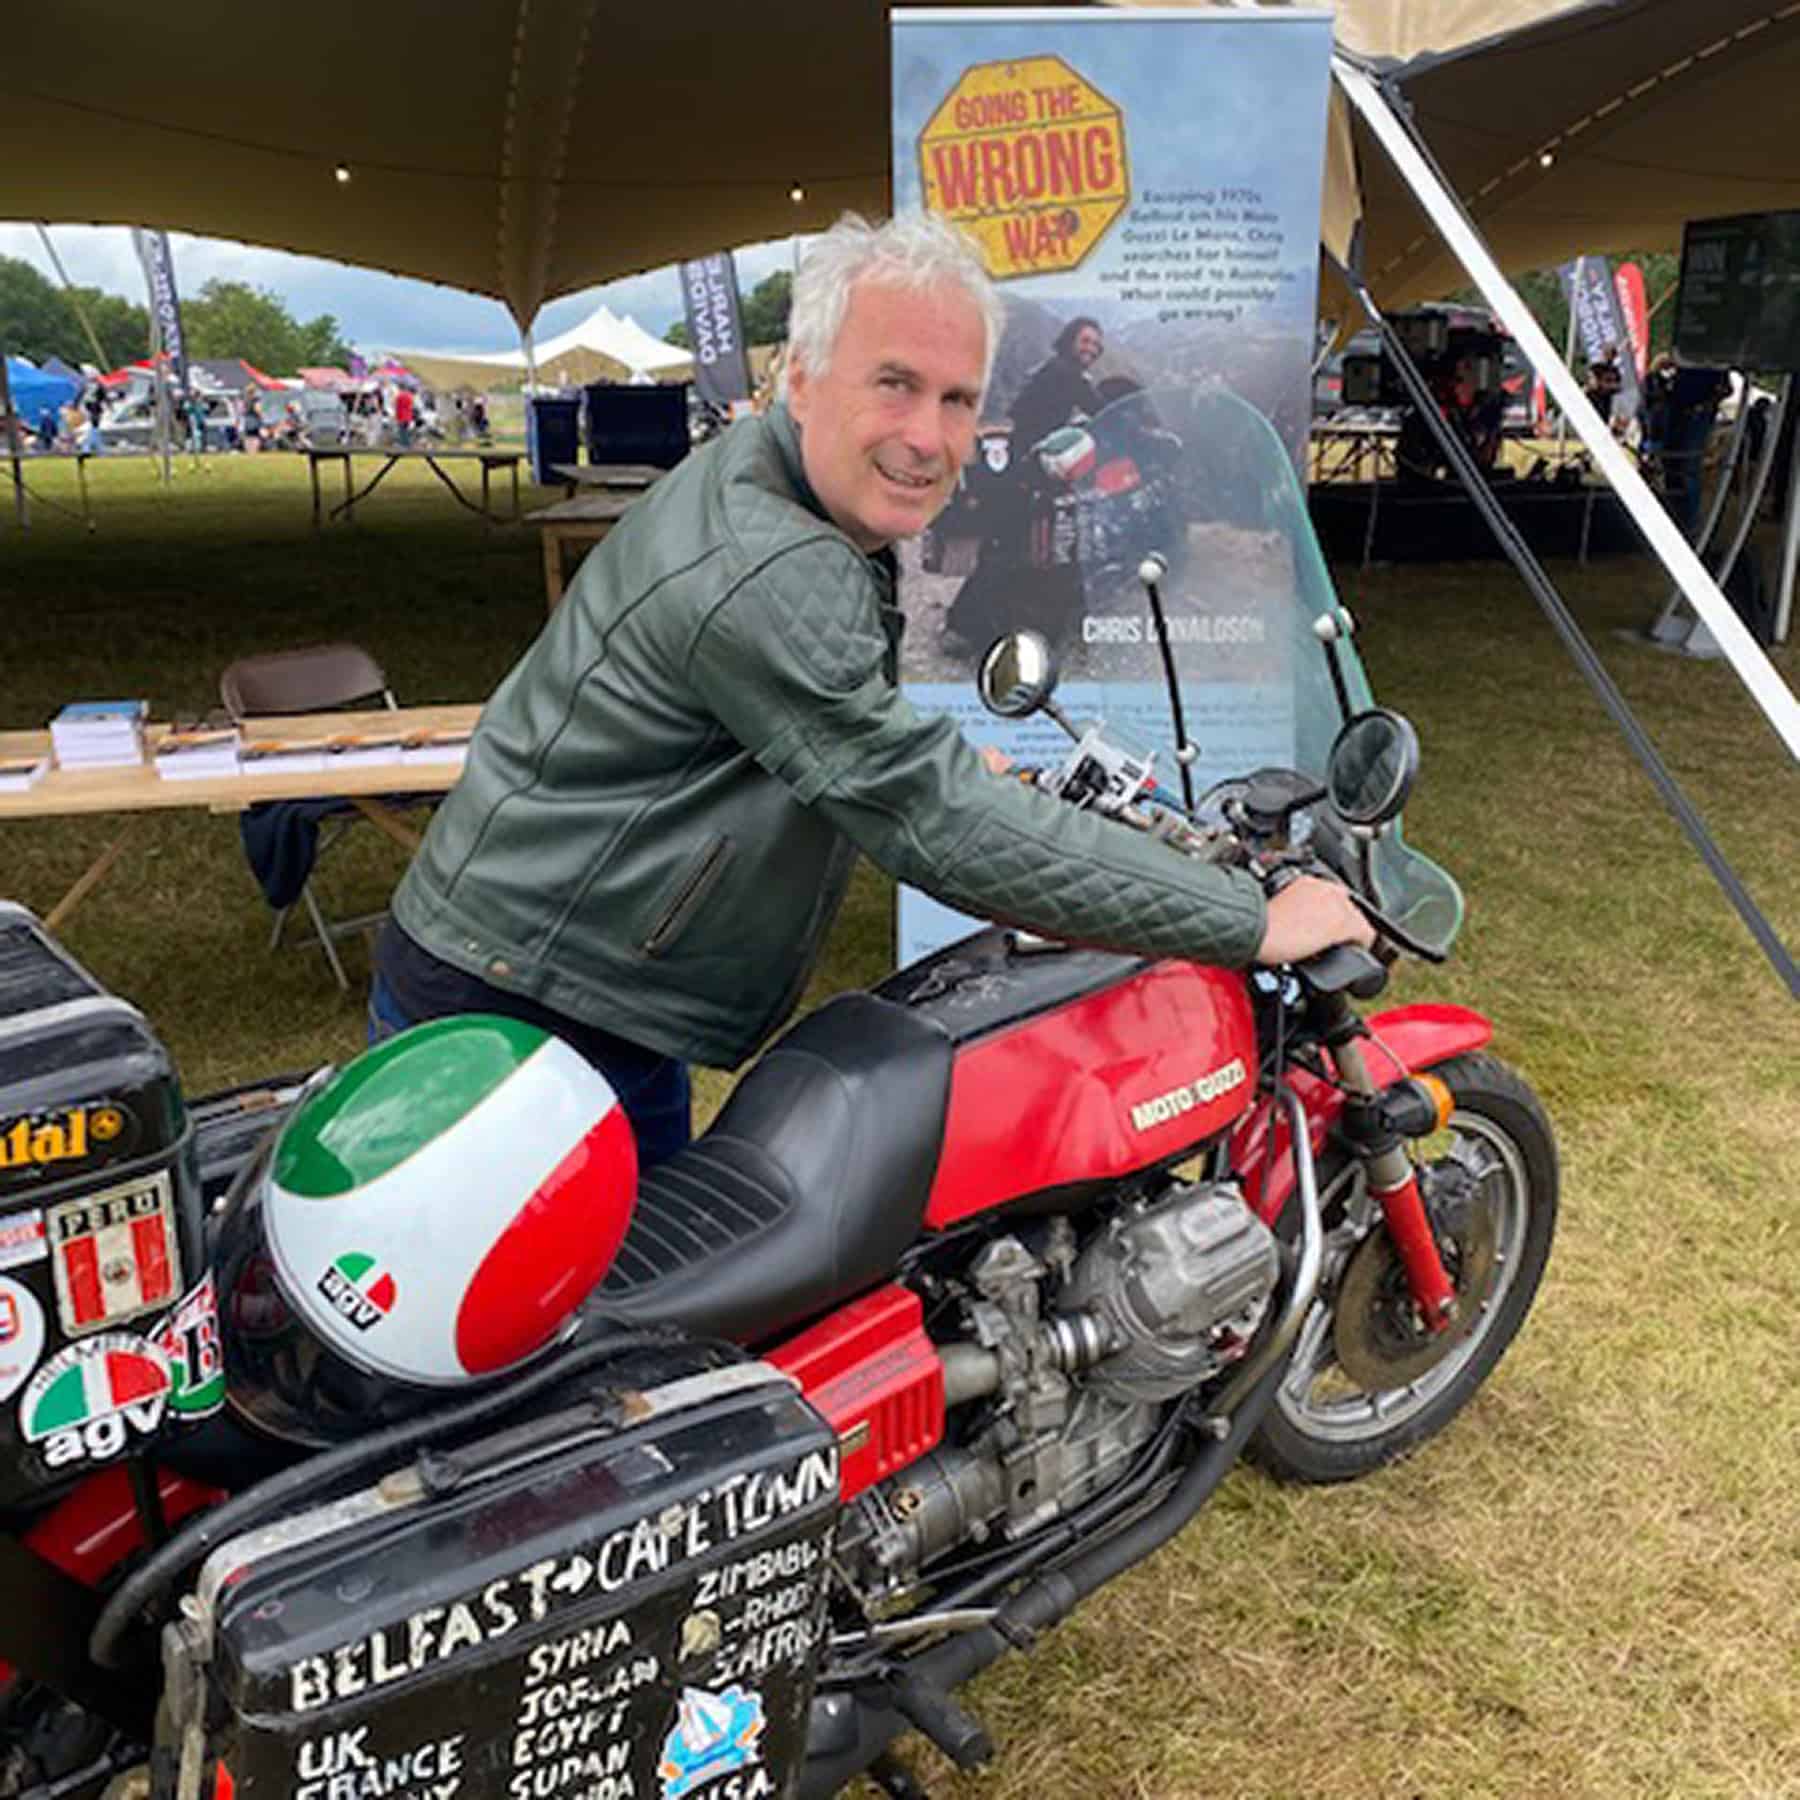 Chris Donaldson and his 1977 Moto Guzzi Le Mans at The Overland Event in Oxford